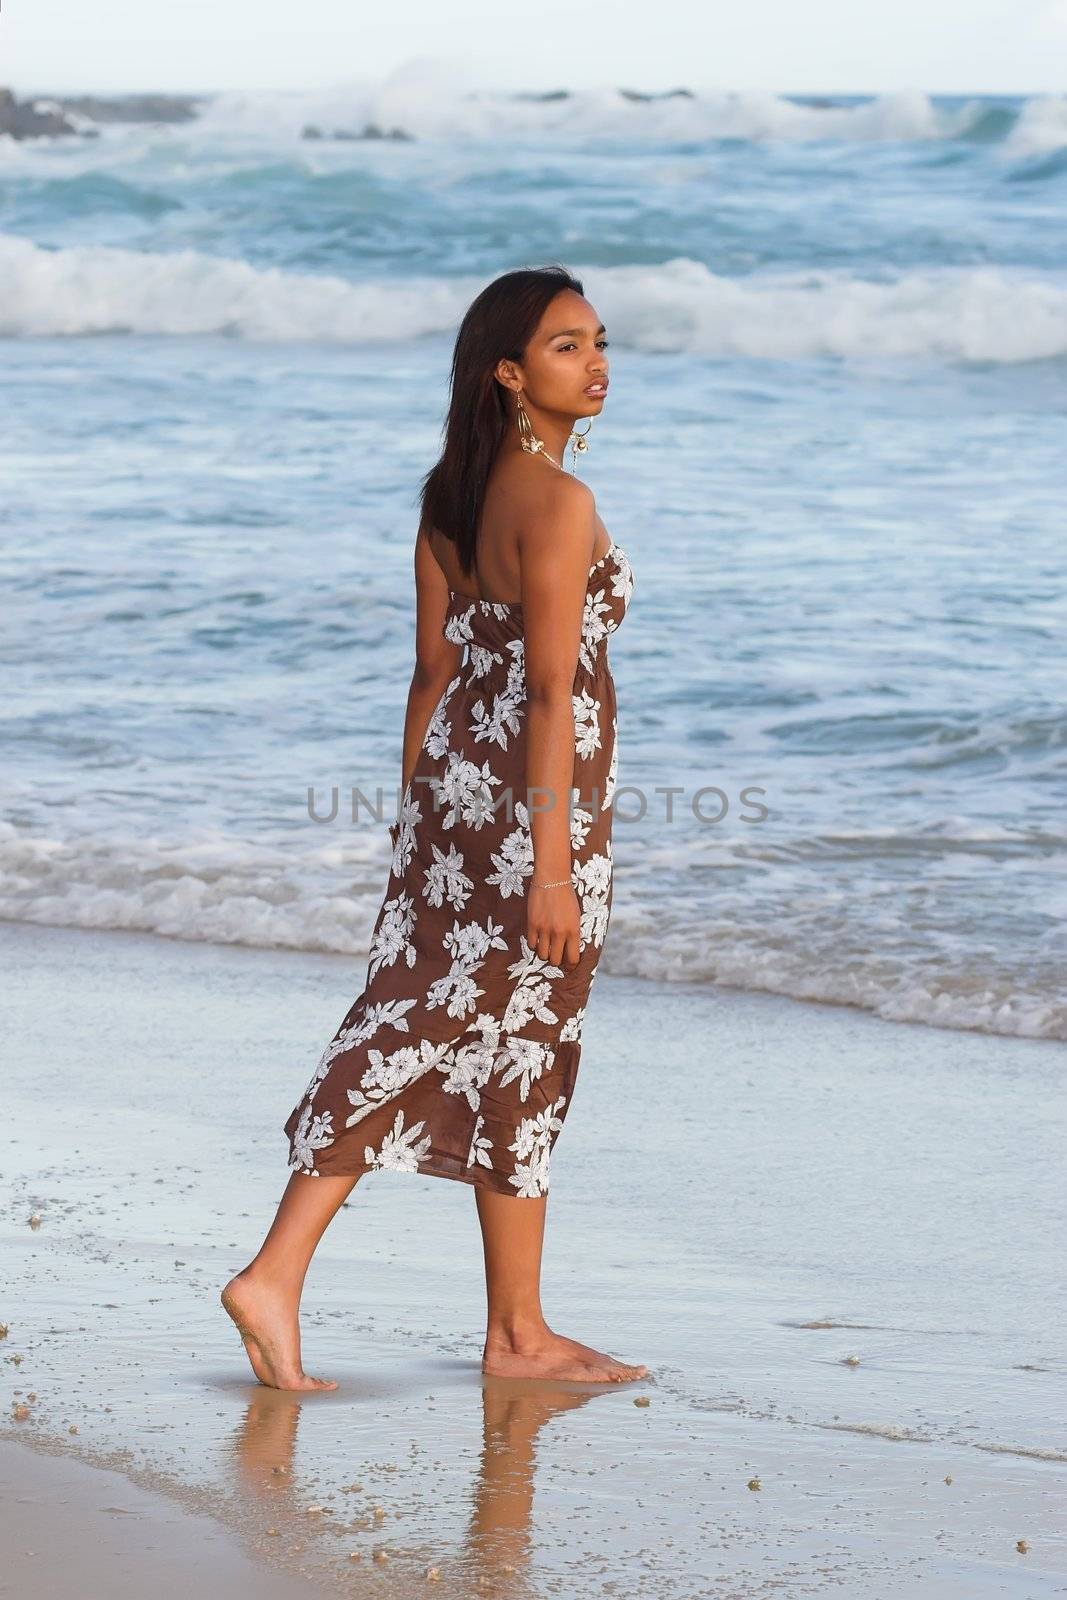 Ethnic model standing on the wet reflective sand at the beach